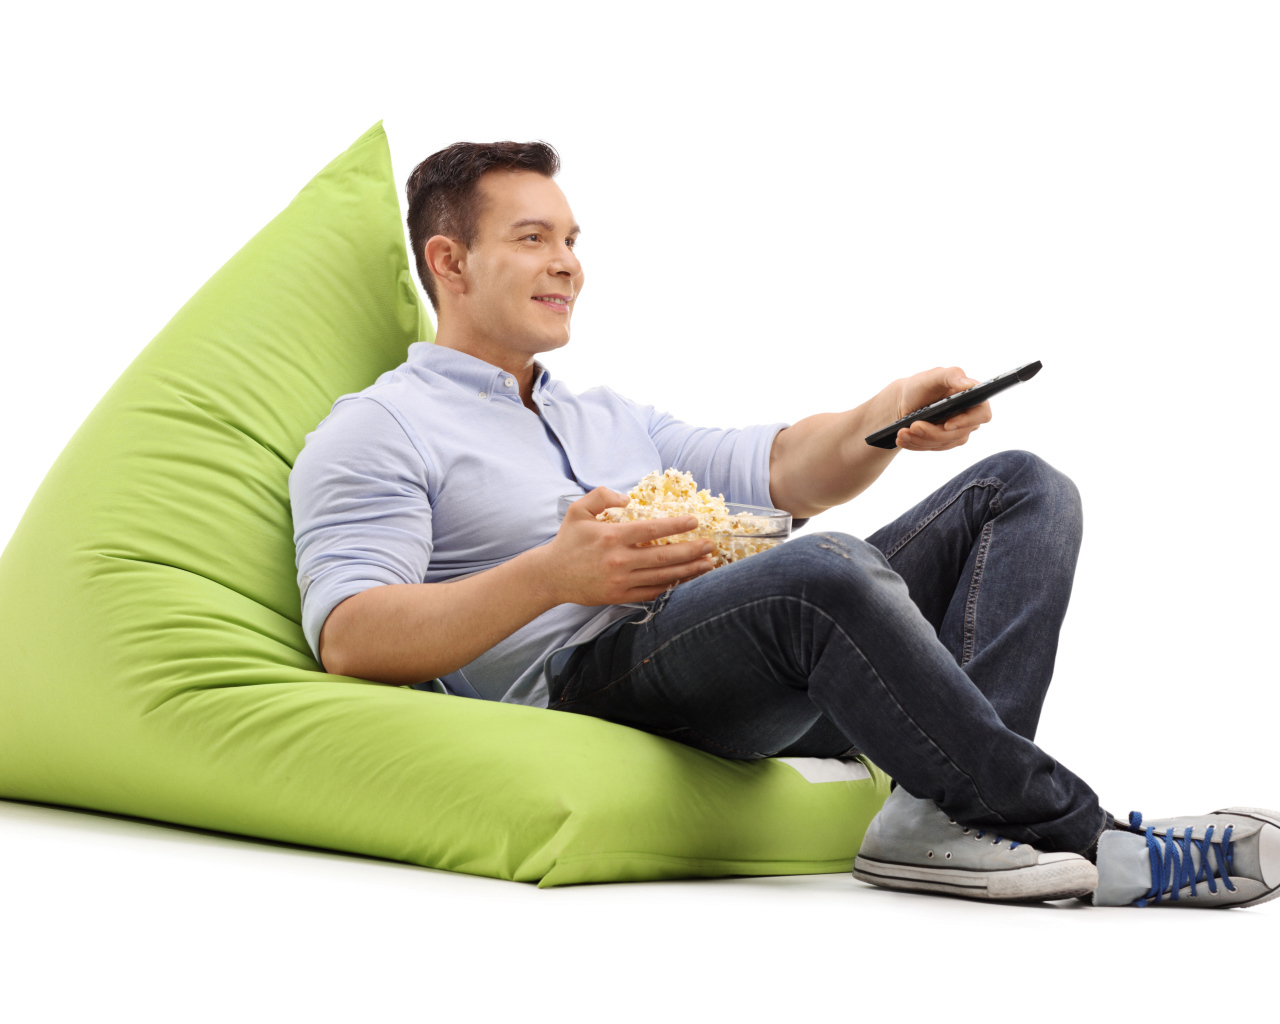 A man with popcorn and a TV remote is lying on a green pillow